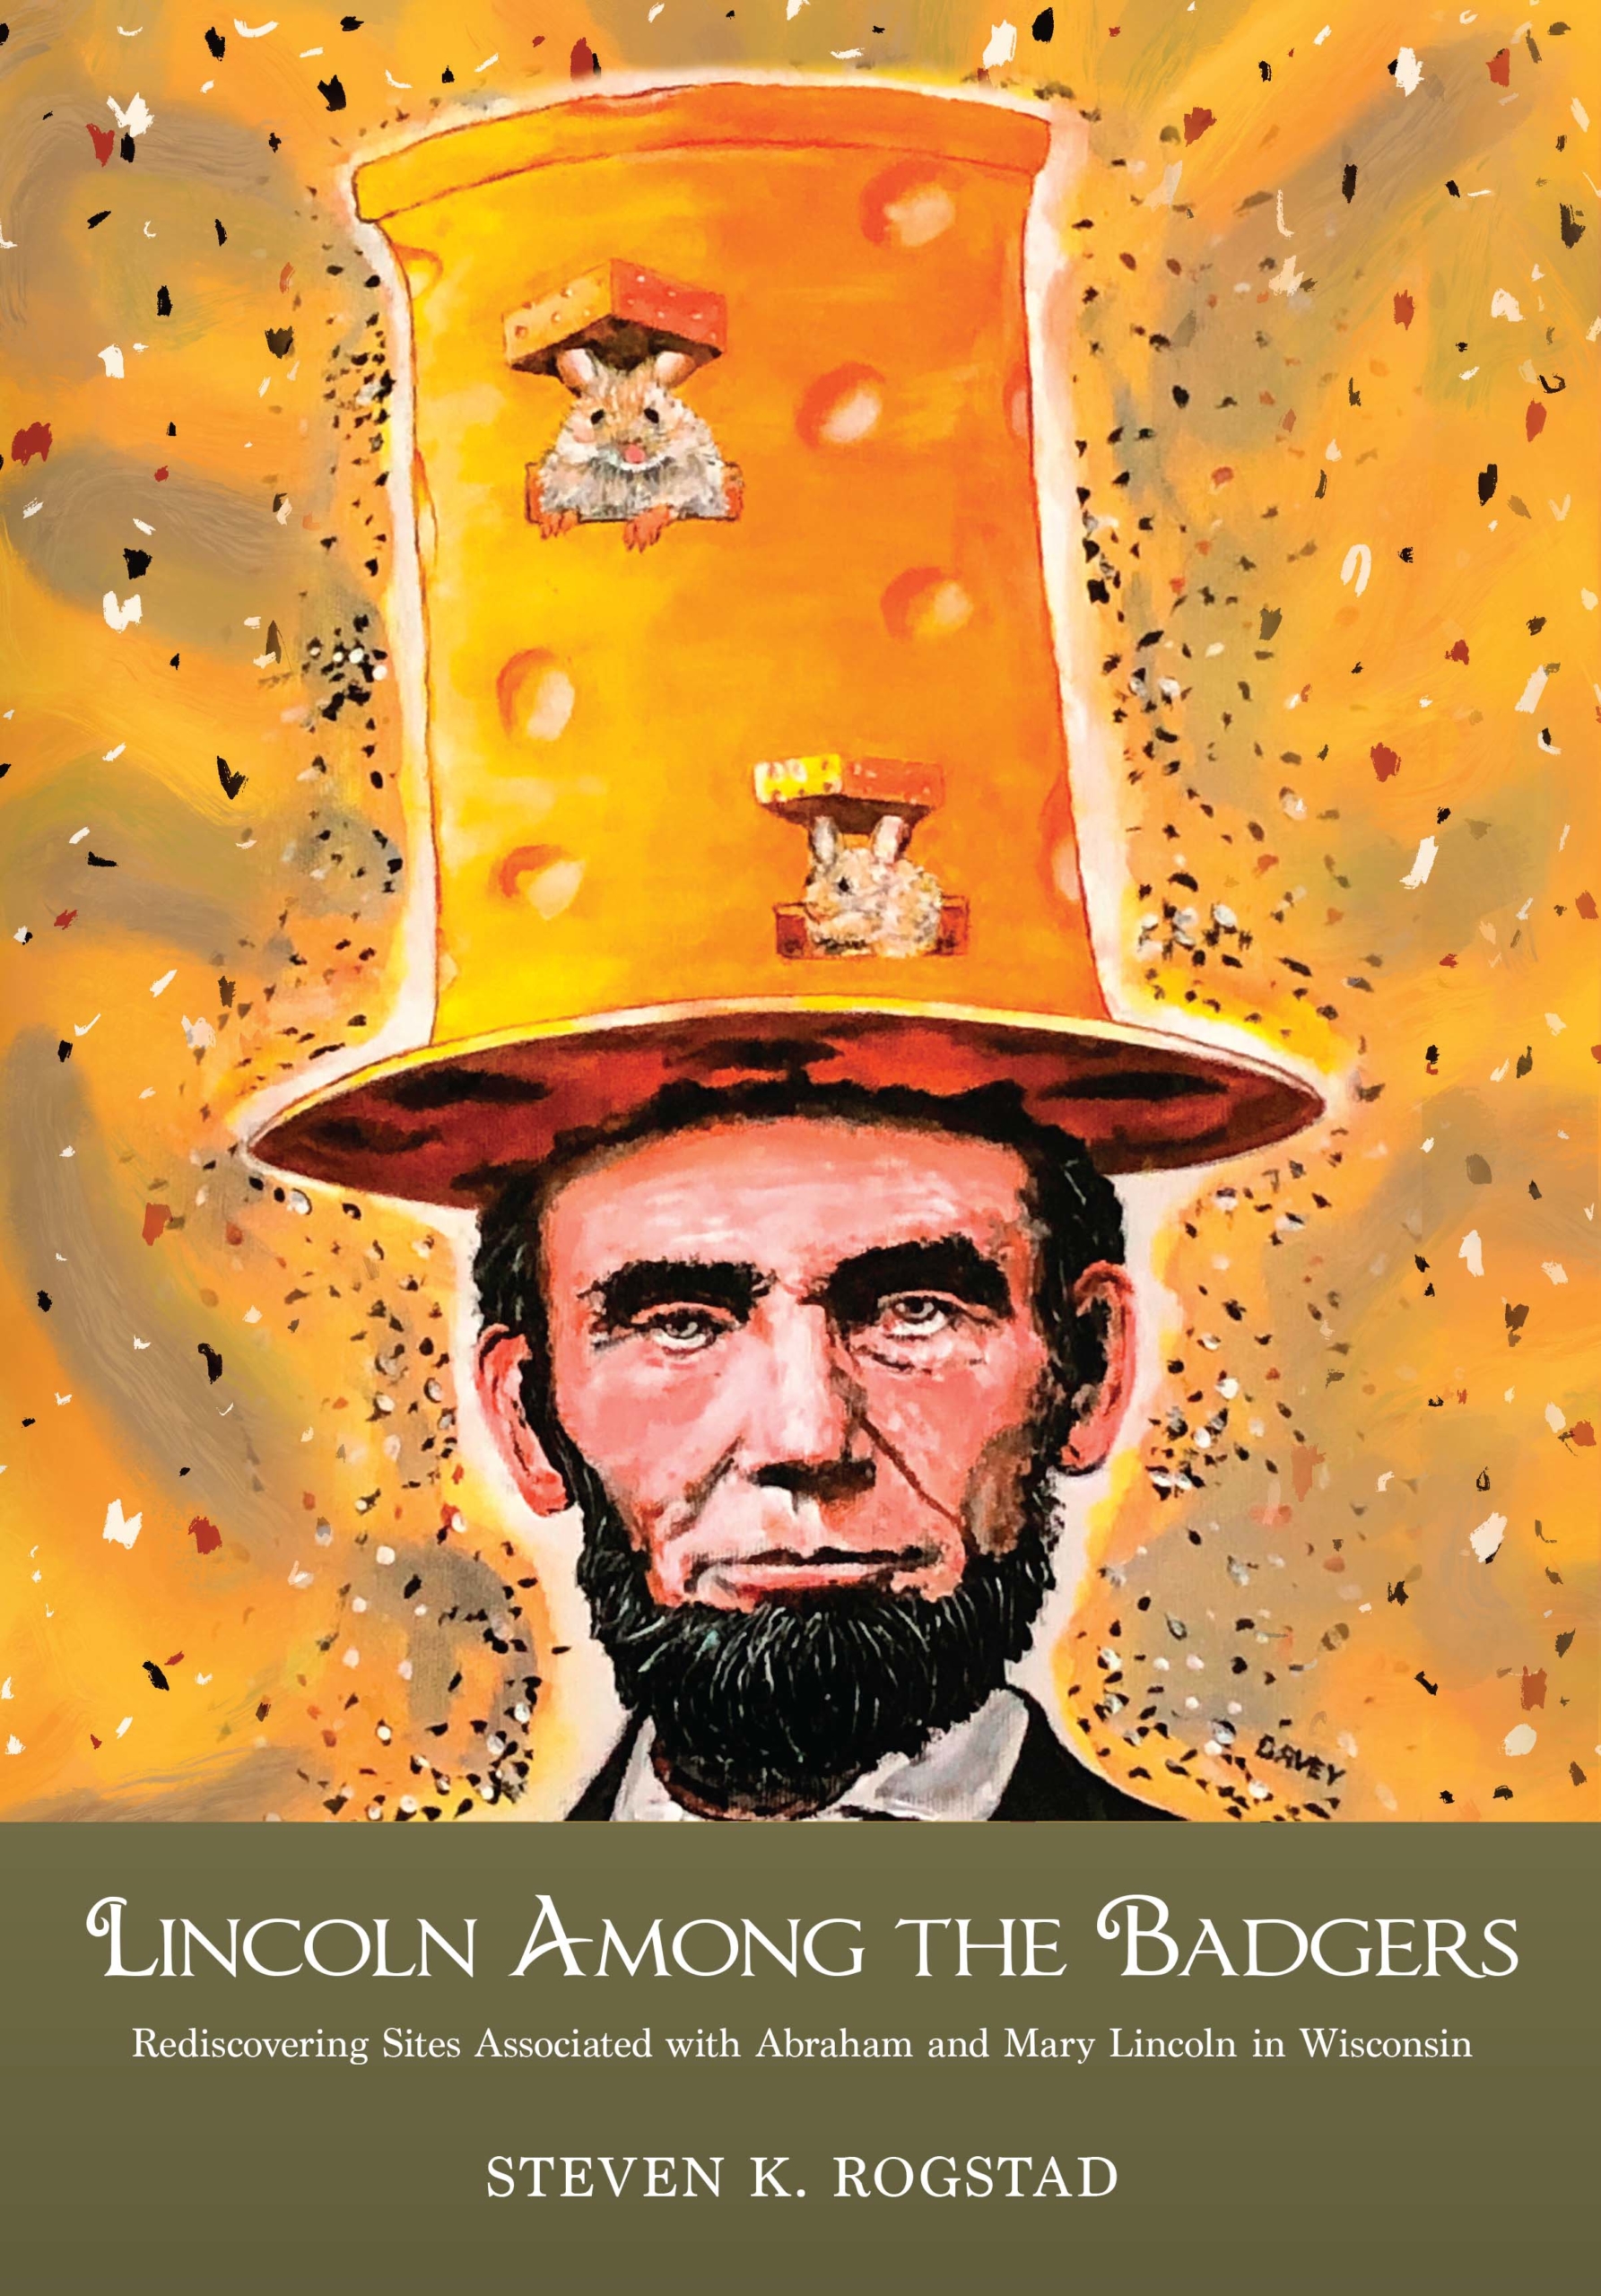 Cover Image, "Lincoln Among The Badgers"